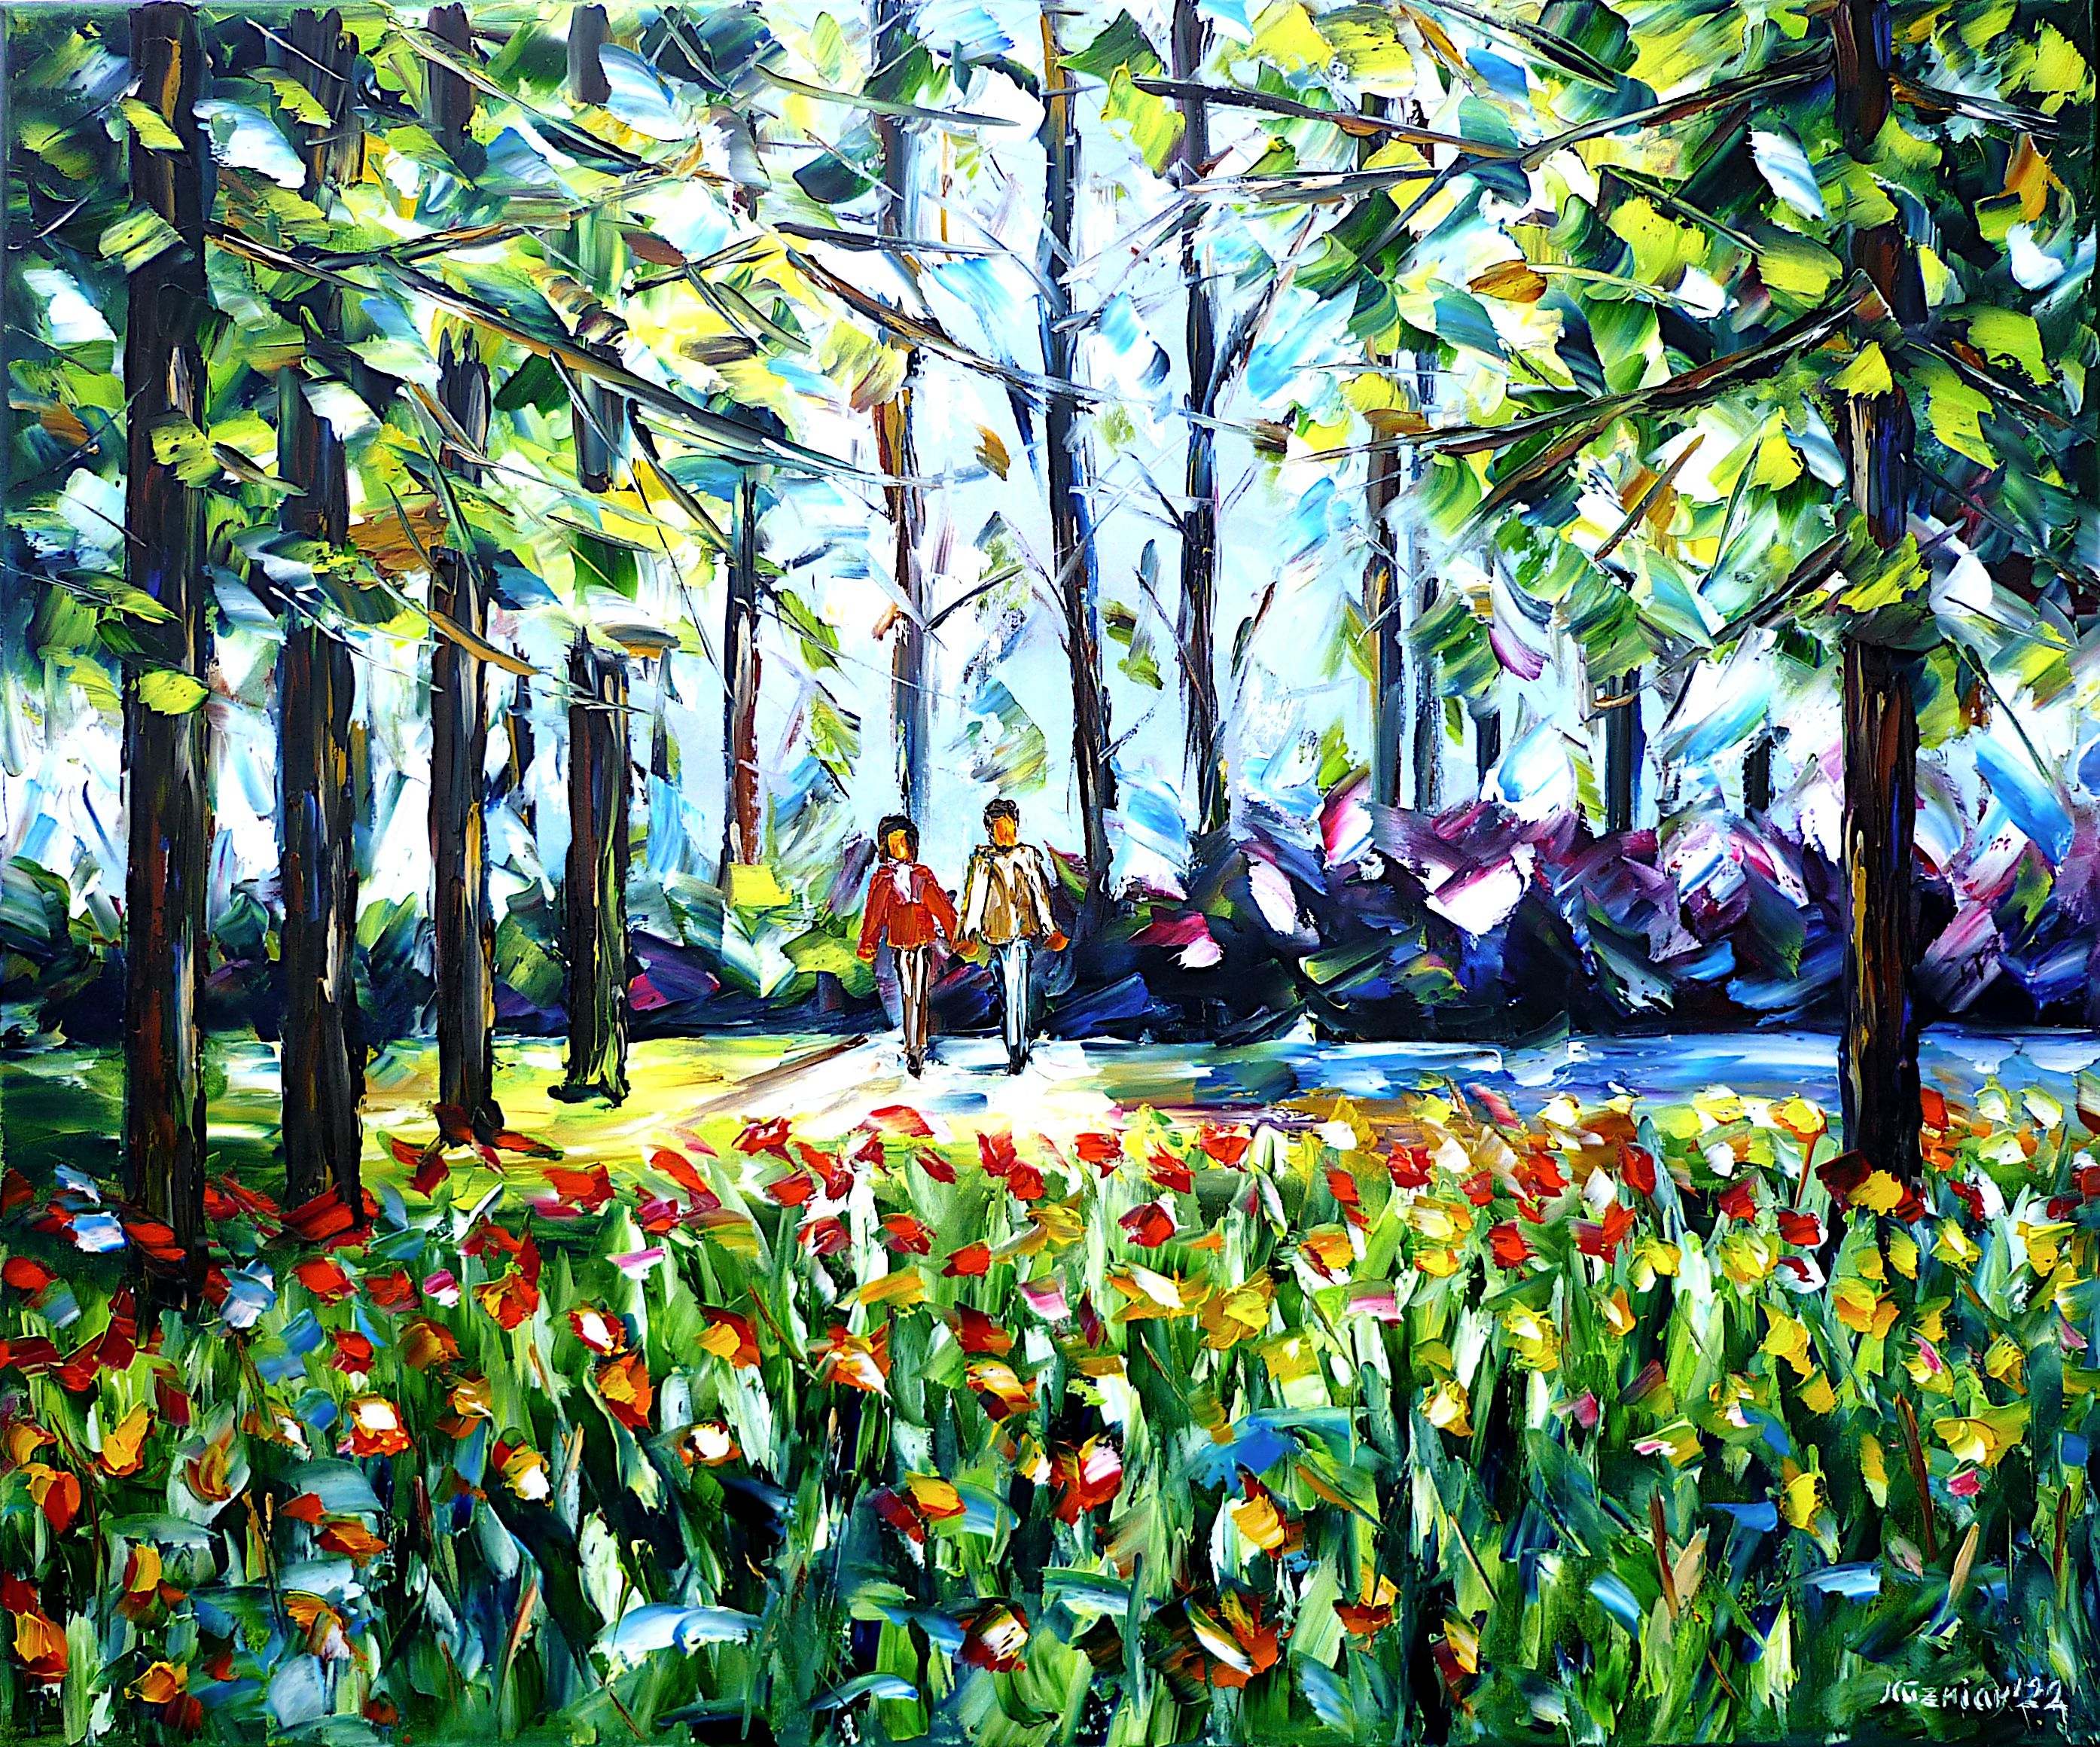 Spring flowers,spring meadow,spring trees,flower meadow,spring day,sea of flowers,people in love,couple in love,lovers taking a walk,love scene,romantic scene,love and romance,romantic picture,romantic painting,walking in the park,people in the park,park painting,people in the green,landscape painting,people in the landscape,in nature,i love you,green colors,green painting,man and woman,park walk,holding hands,loving couple holding hands,hand in hand,spring colors,spring picture,spring painting,park in spring,spring walk,people in spring,lovers in spring,spring feelings,spring love,genre painting,palette knife oil painting,modern art,impressionism,expressionism,abstract painting,lively colors,colorful painting,bright colors,light reflections,impasto painting,figurative painting